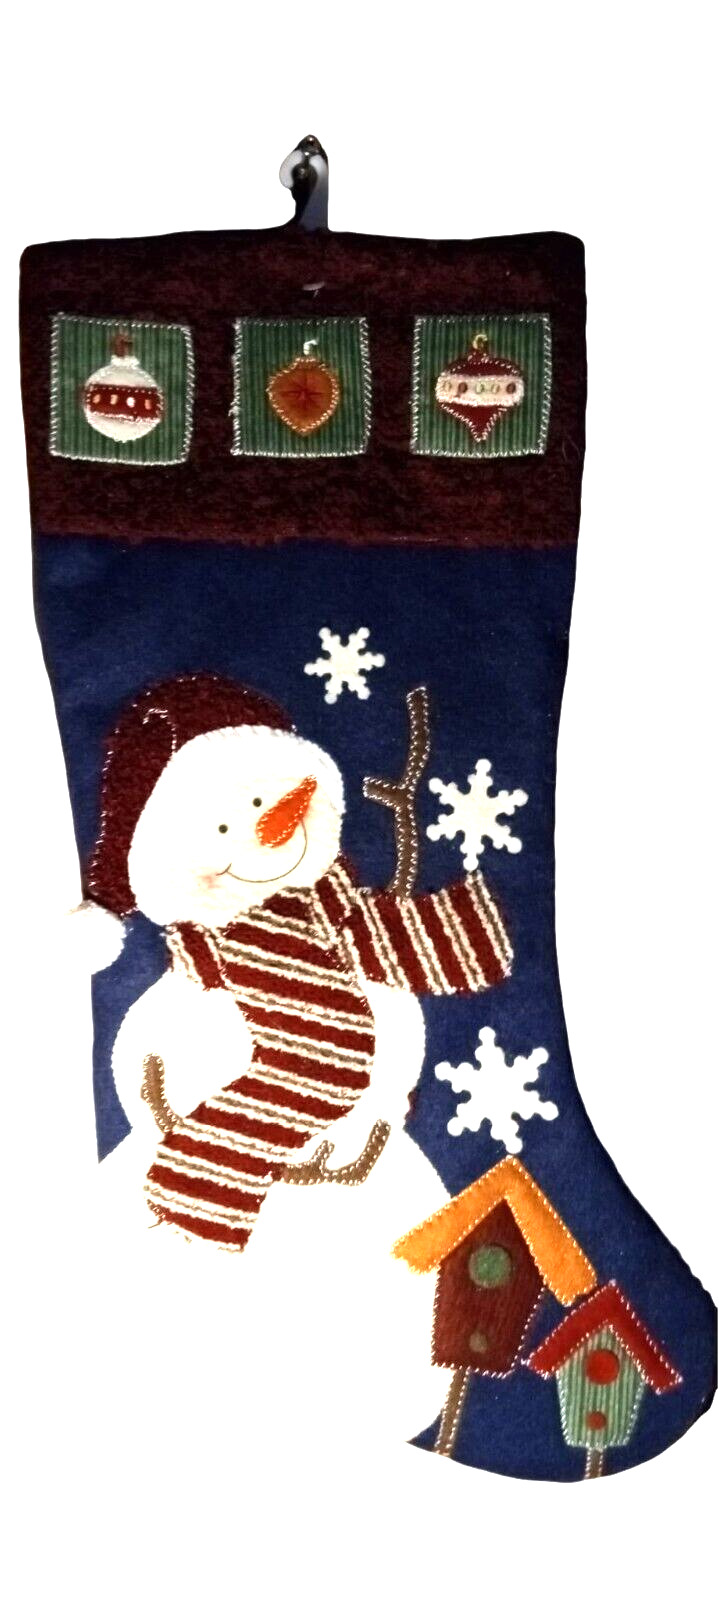 VINTAGE CHRISTMAS STOCKING EMBROIDERED QUILTED SNOWMAN HOLIDAY DECORATION